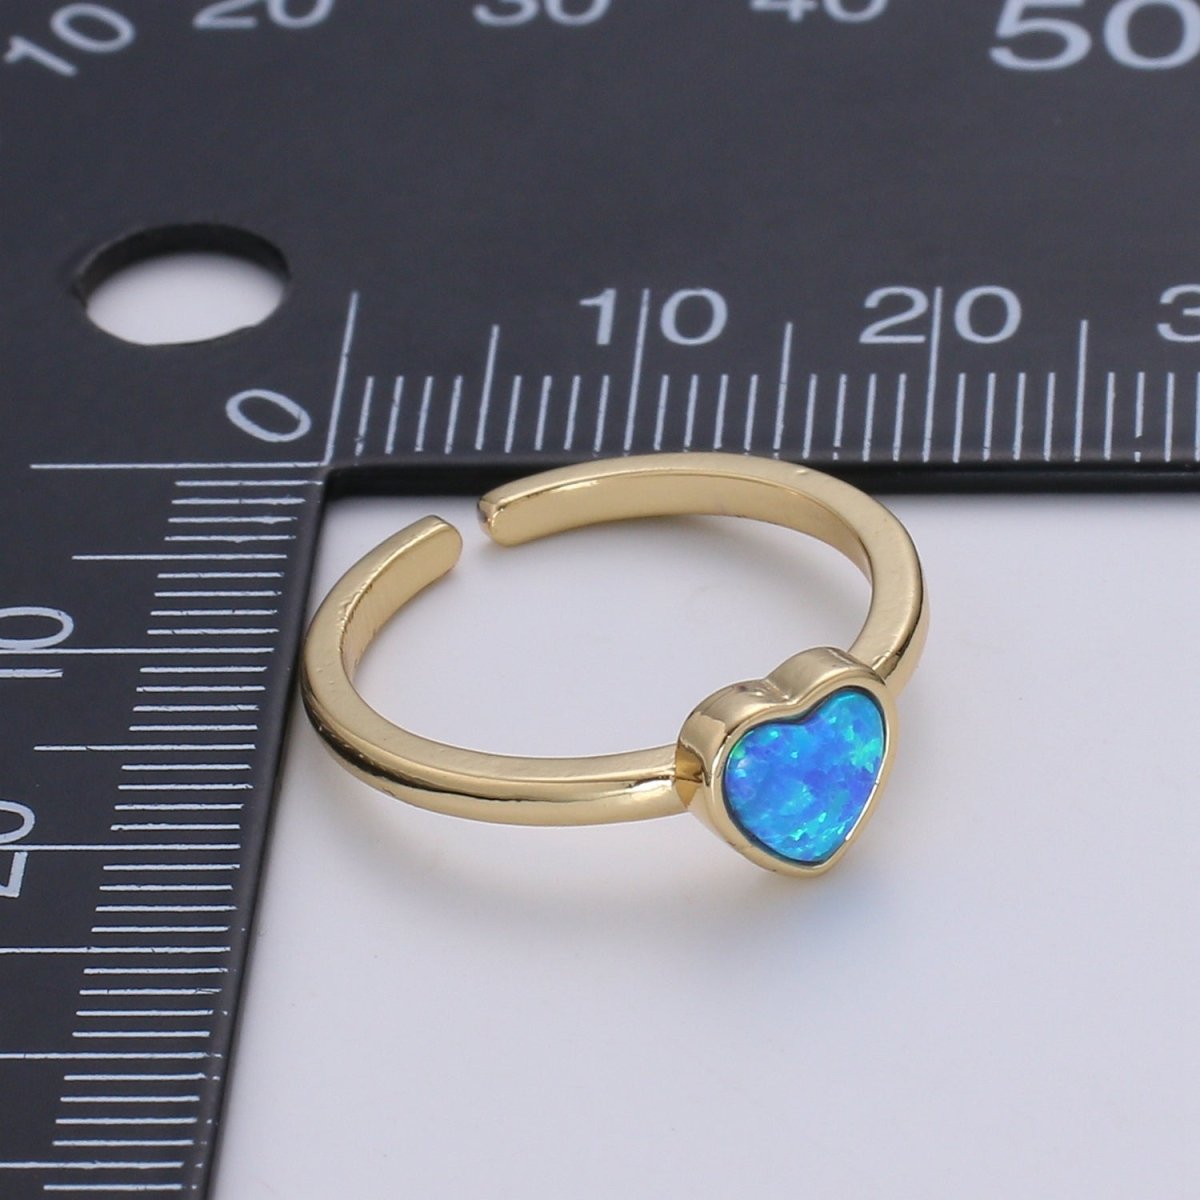 1pc 24K Gold Opal Ring, Love Opal Open Adjustable Ring, Solitaire White Opal Lab Heart Design Band Jewelry R528 R529 - DLUXCA